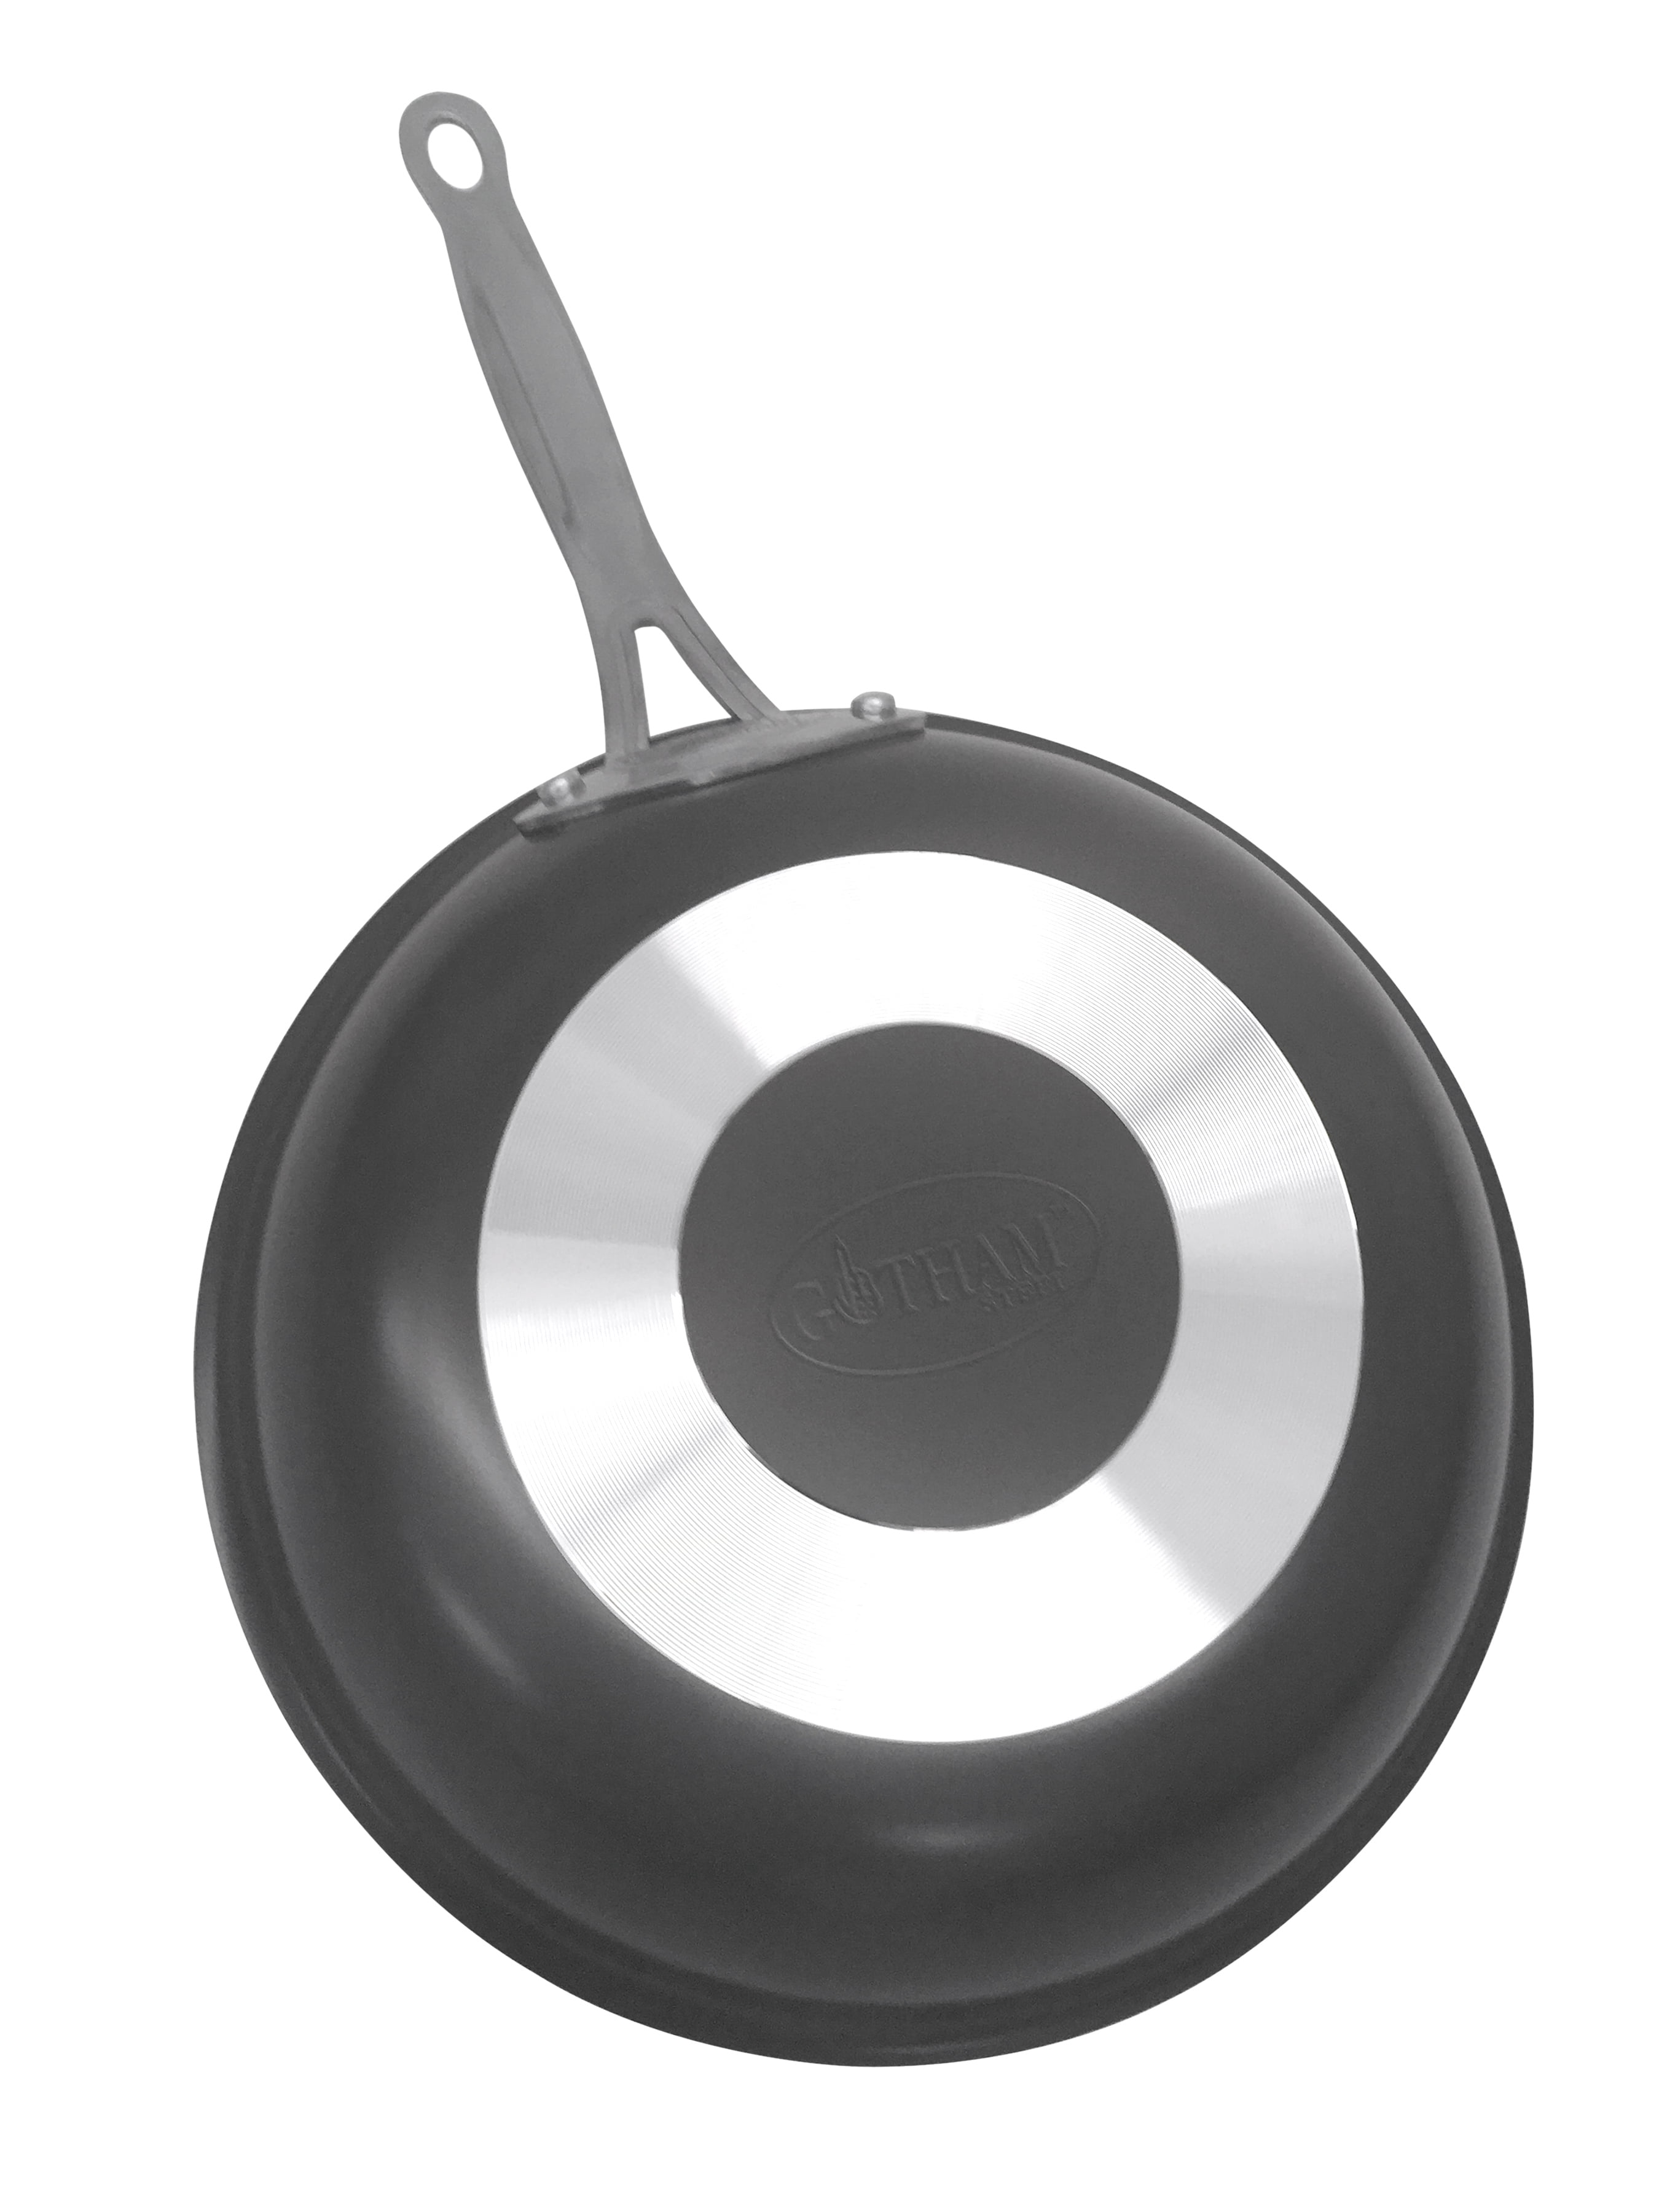 Gotham Steel Non-Stick Frying Pan Product Review: As seen on TV